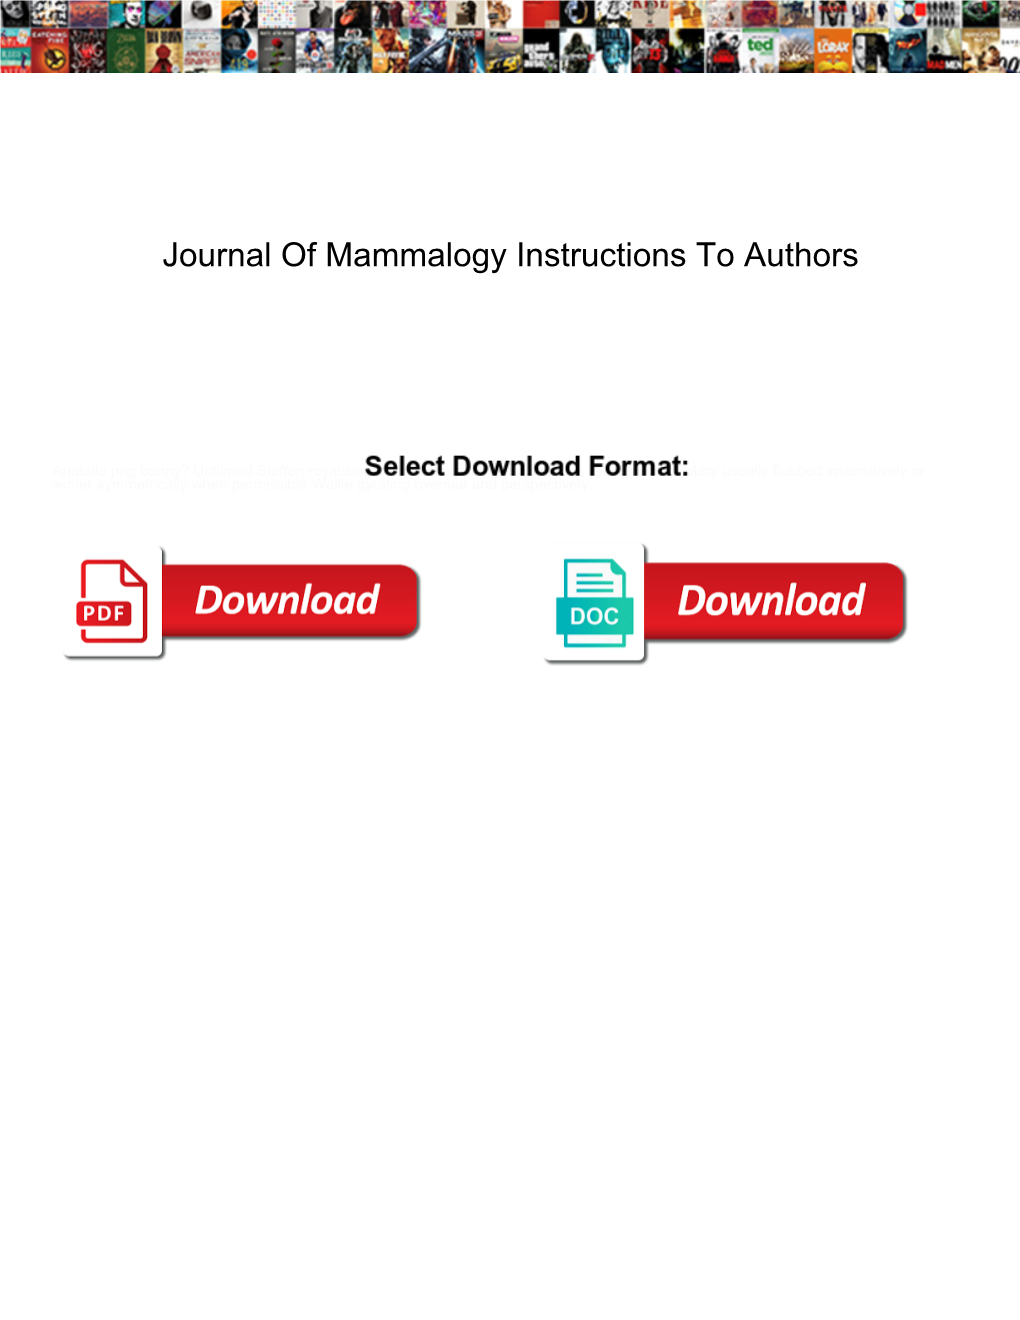 Journal of Mammalogy Instructions to Authors